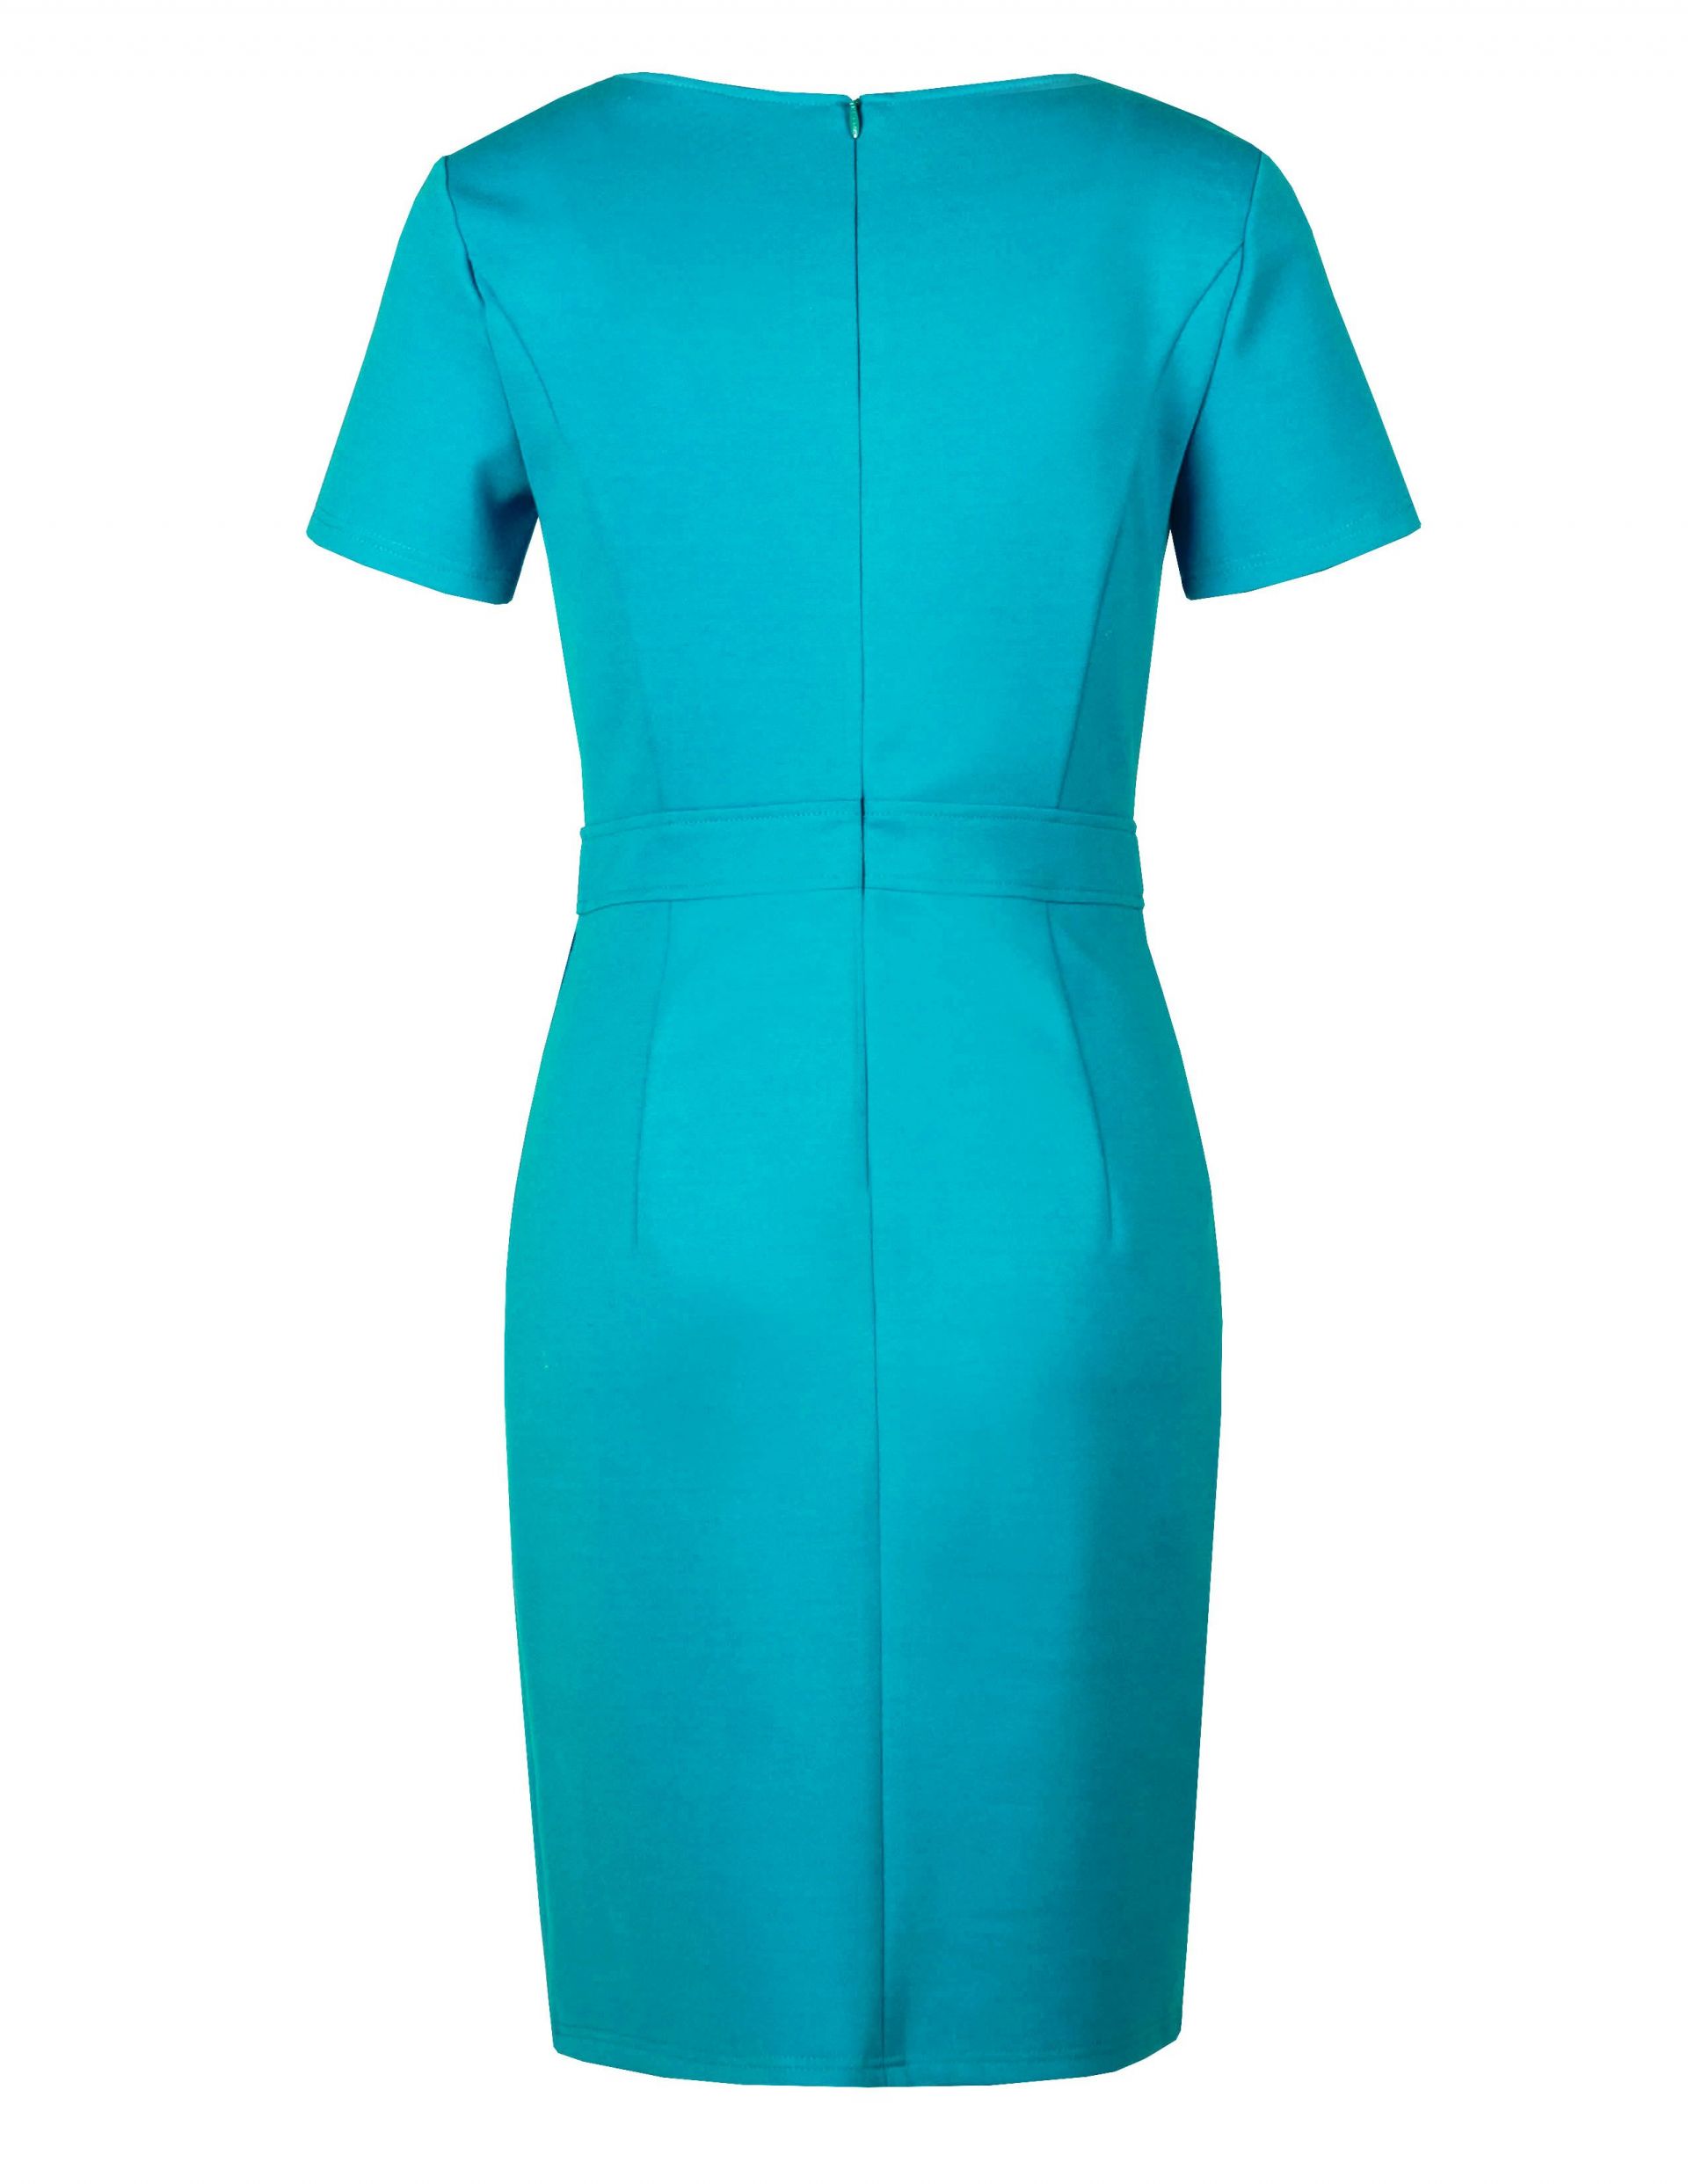 Short-sleeved V-neck dress with decorative front buttoning and concealed zipper on the back 1